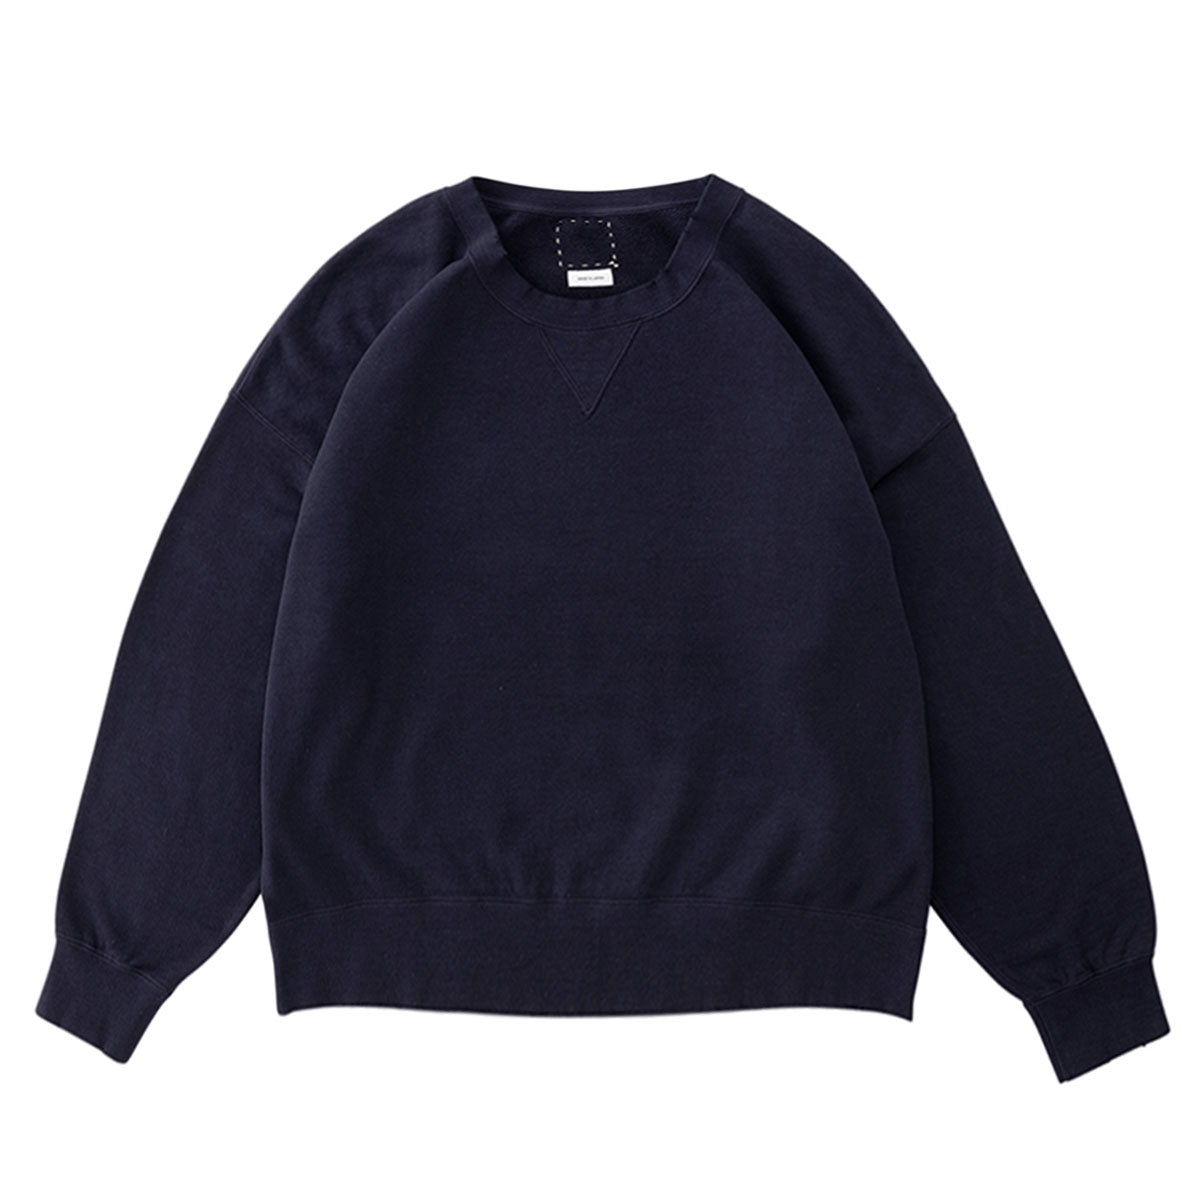 AMPLUS SB SWEAT L/S (U.D.) - Why are you here?